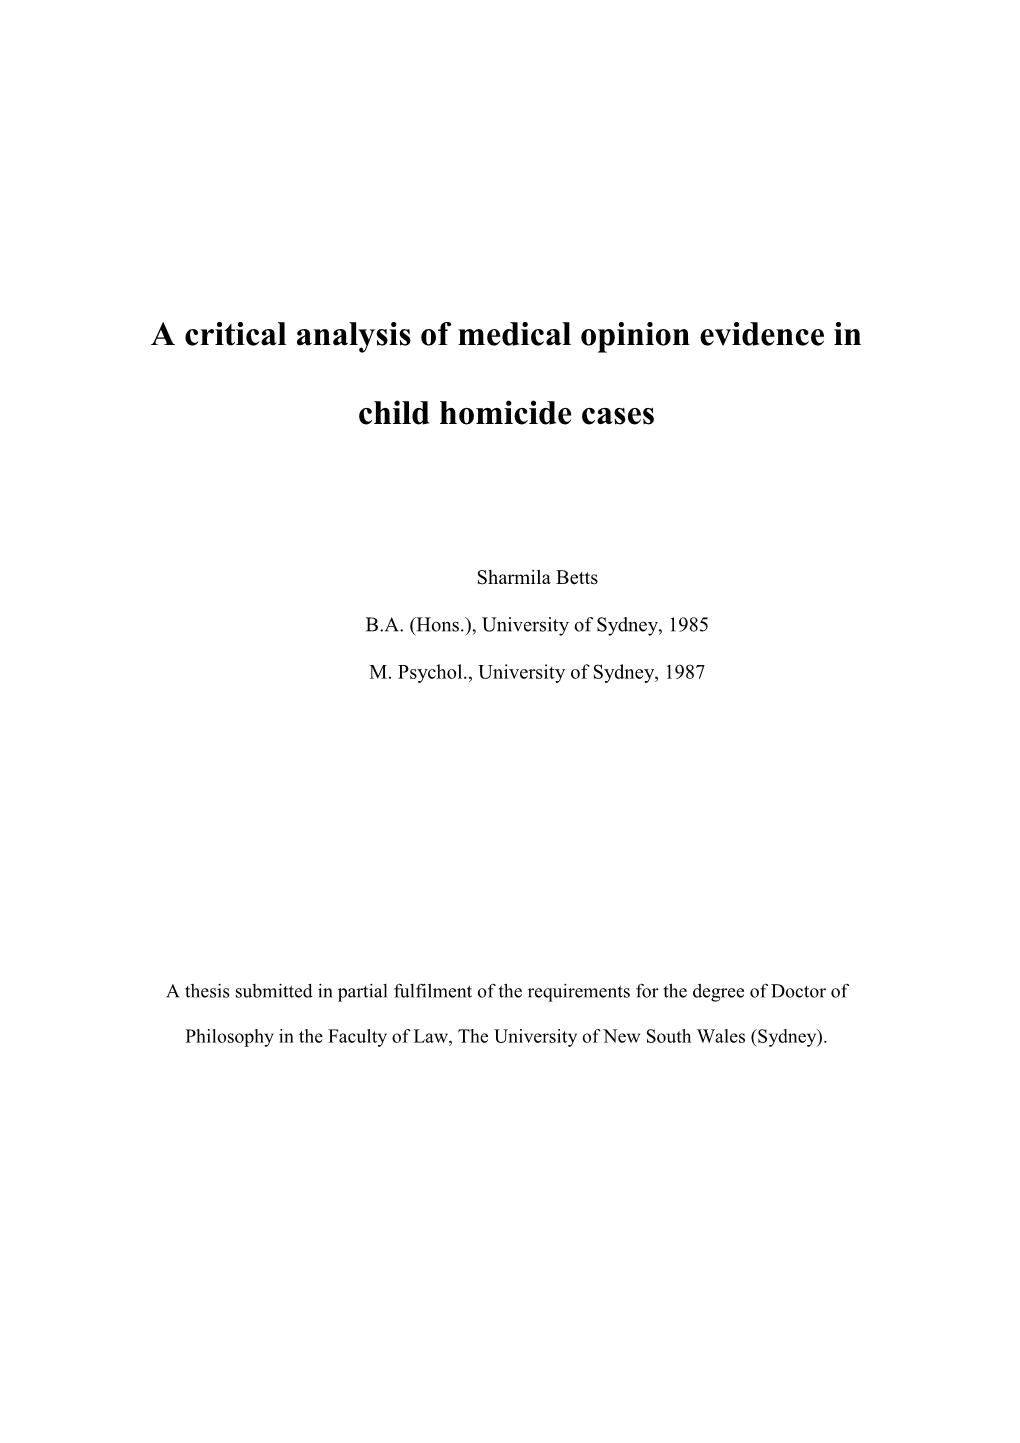 A Critical Analysis of Medical Opinion Evidence in Child Homicide Cases